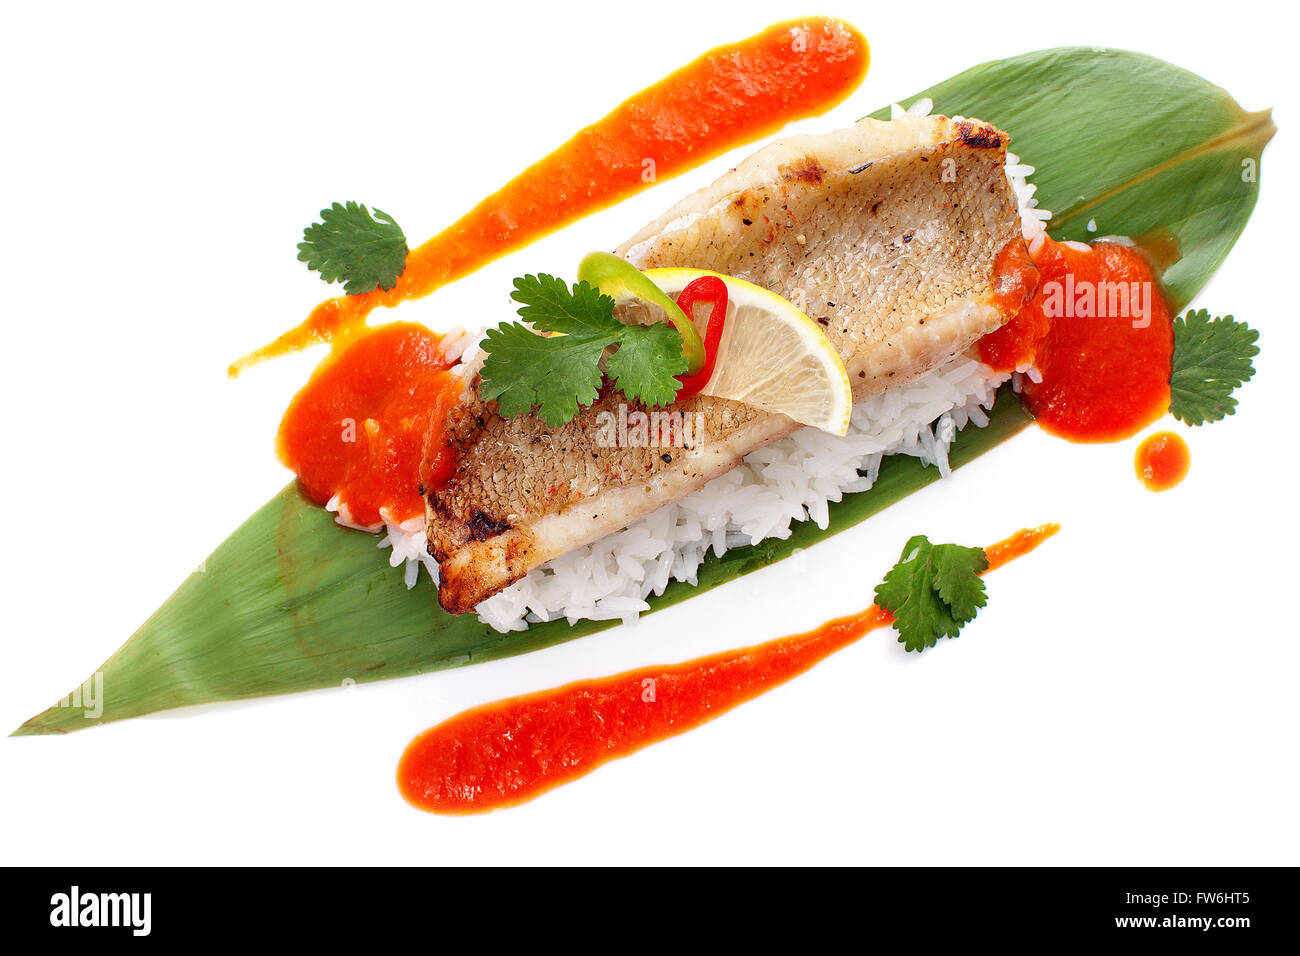 Perch fillets on bamboo leaves with rice and sauce Stock Photo